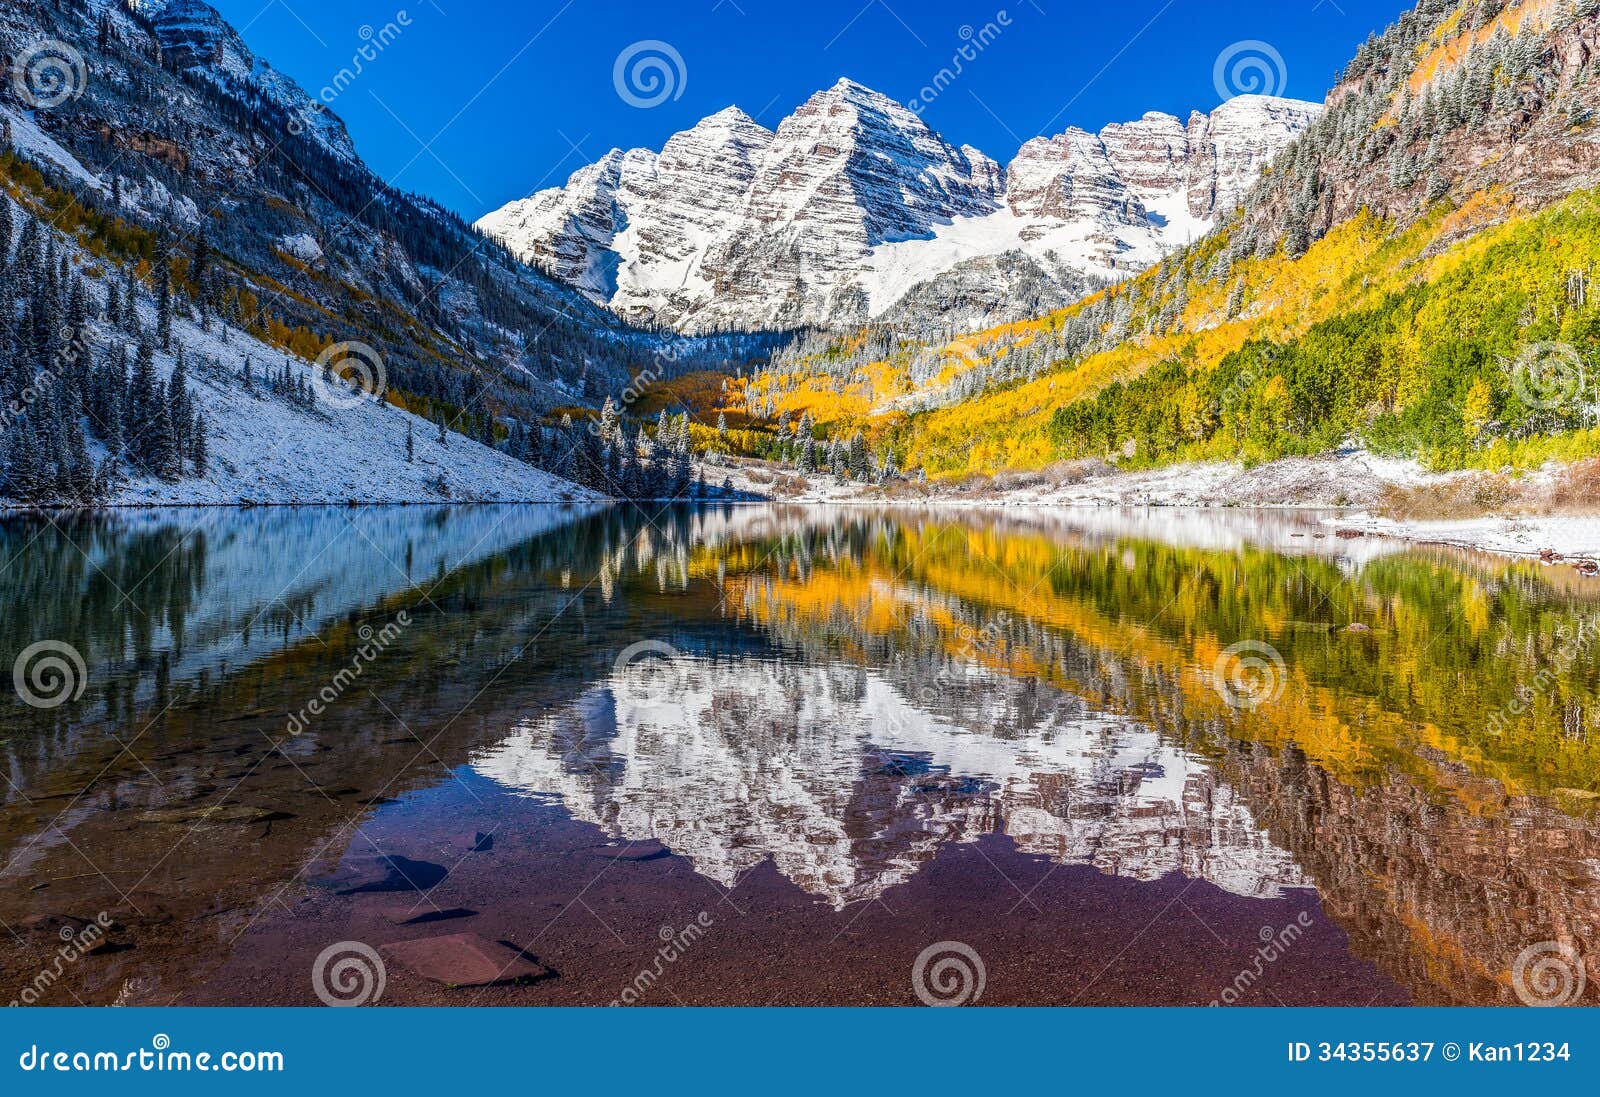 winter and fall foliage in maroon bells, aspen, co